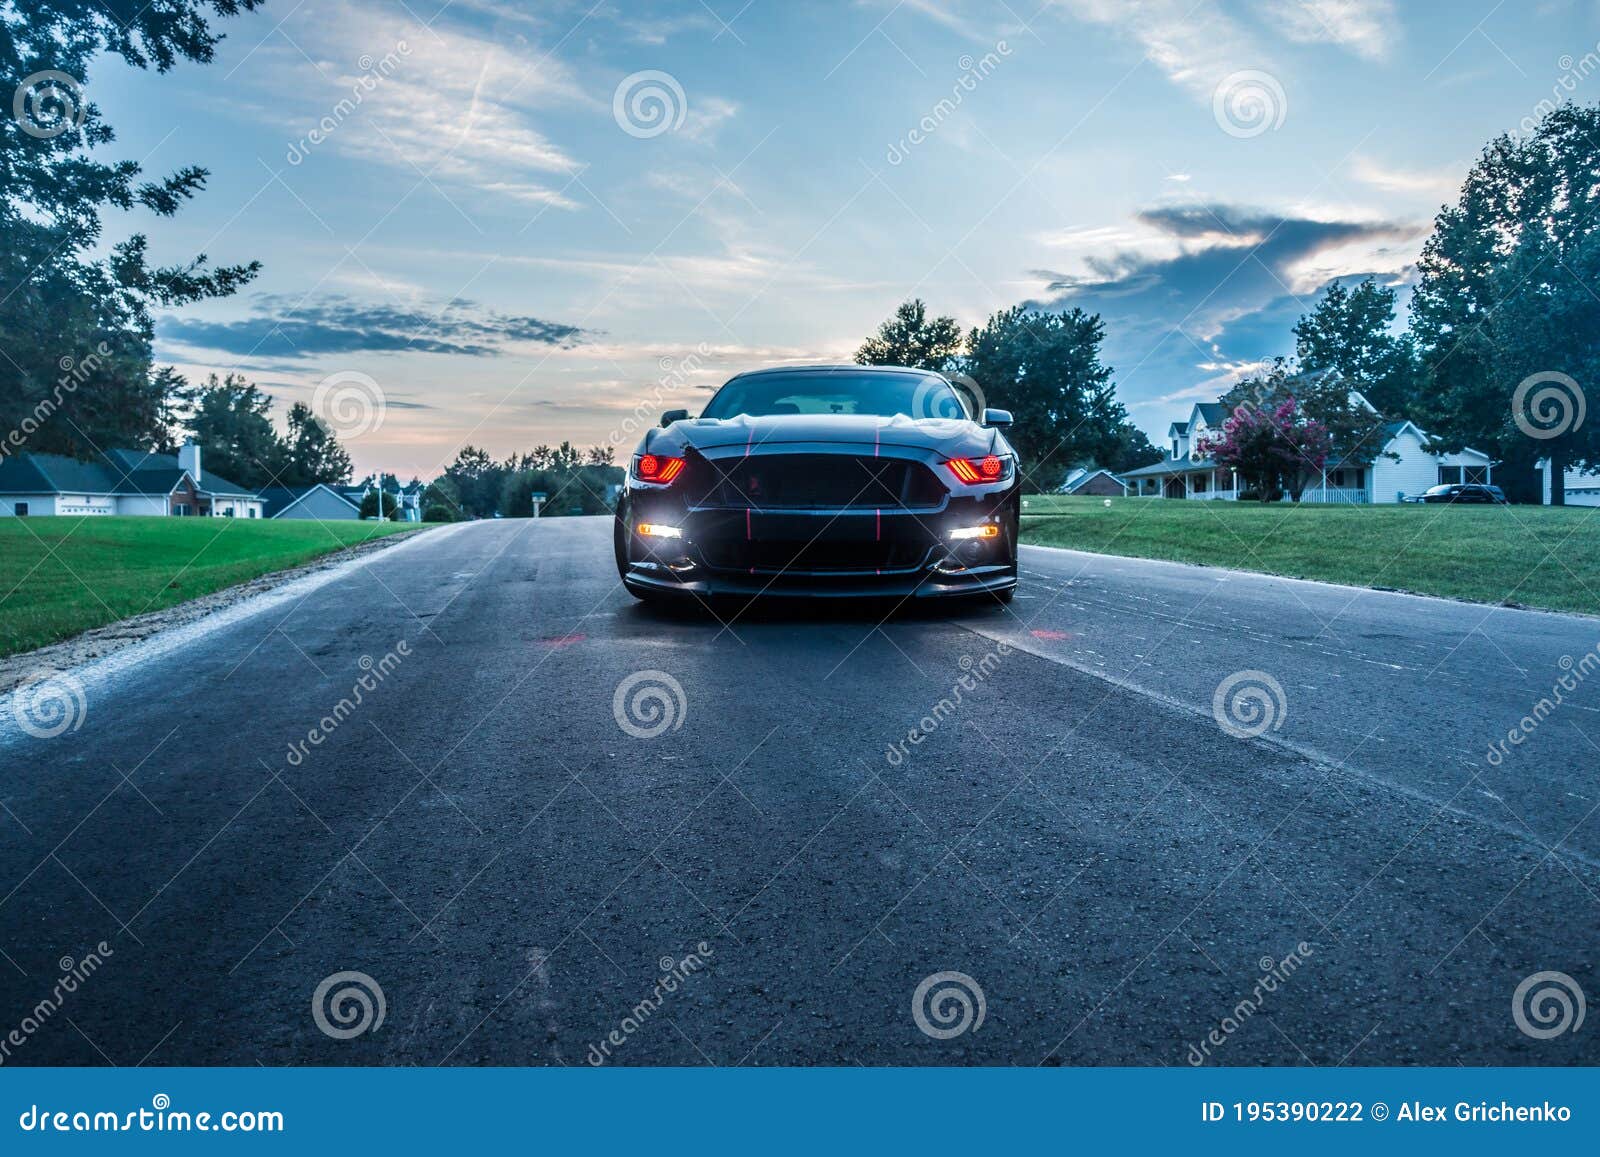 fast american power muscle car at sunset on road